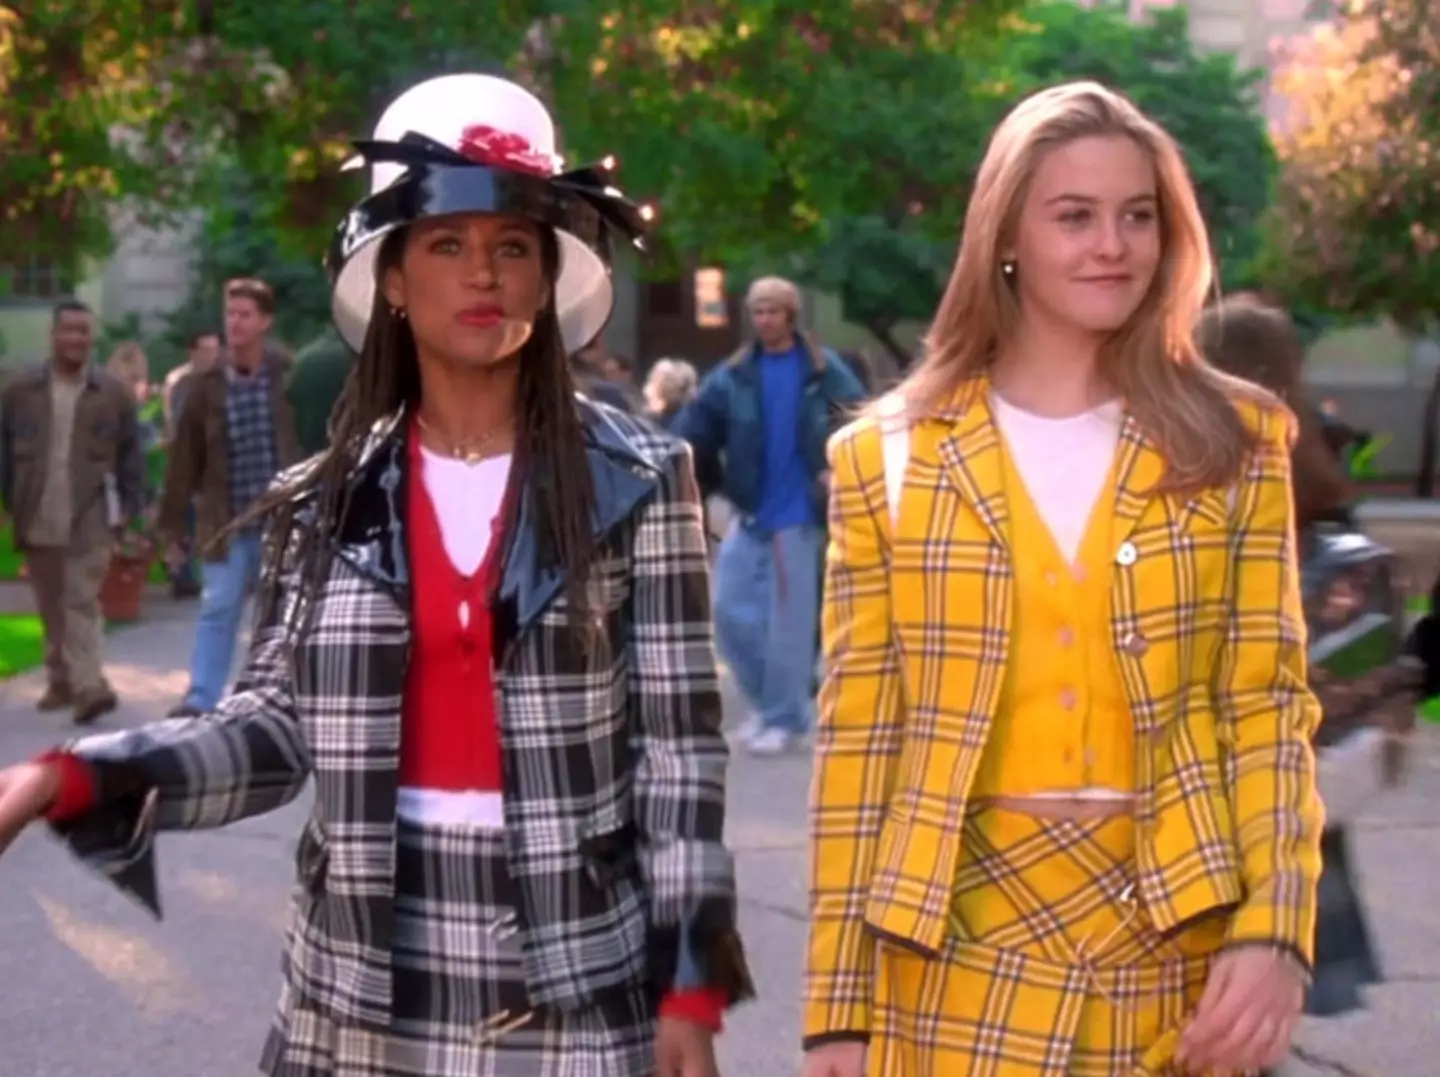 Alicia pictured with Clueless co-star Stacey Dash in the 1995 film.